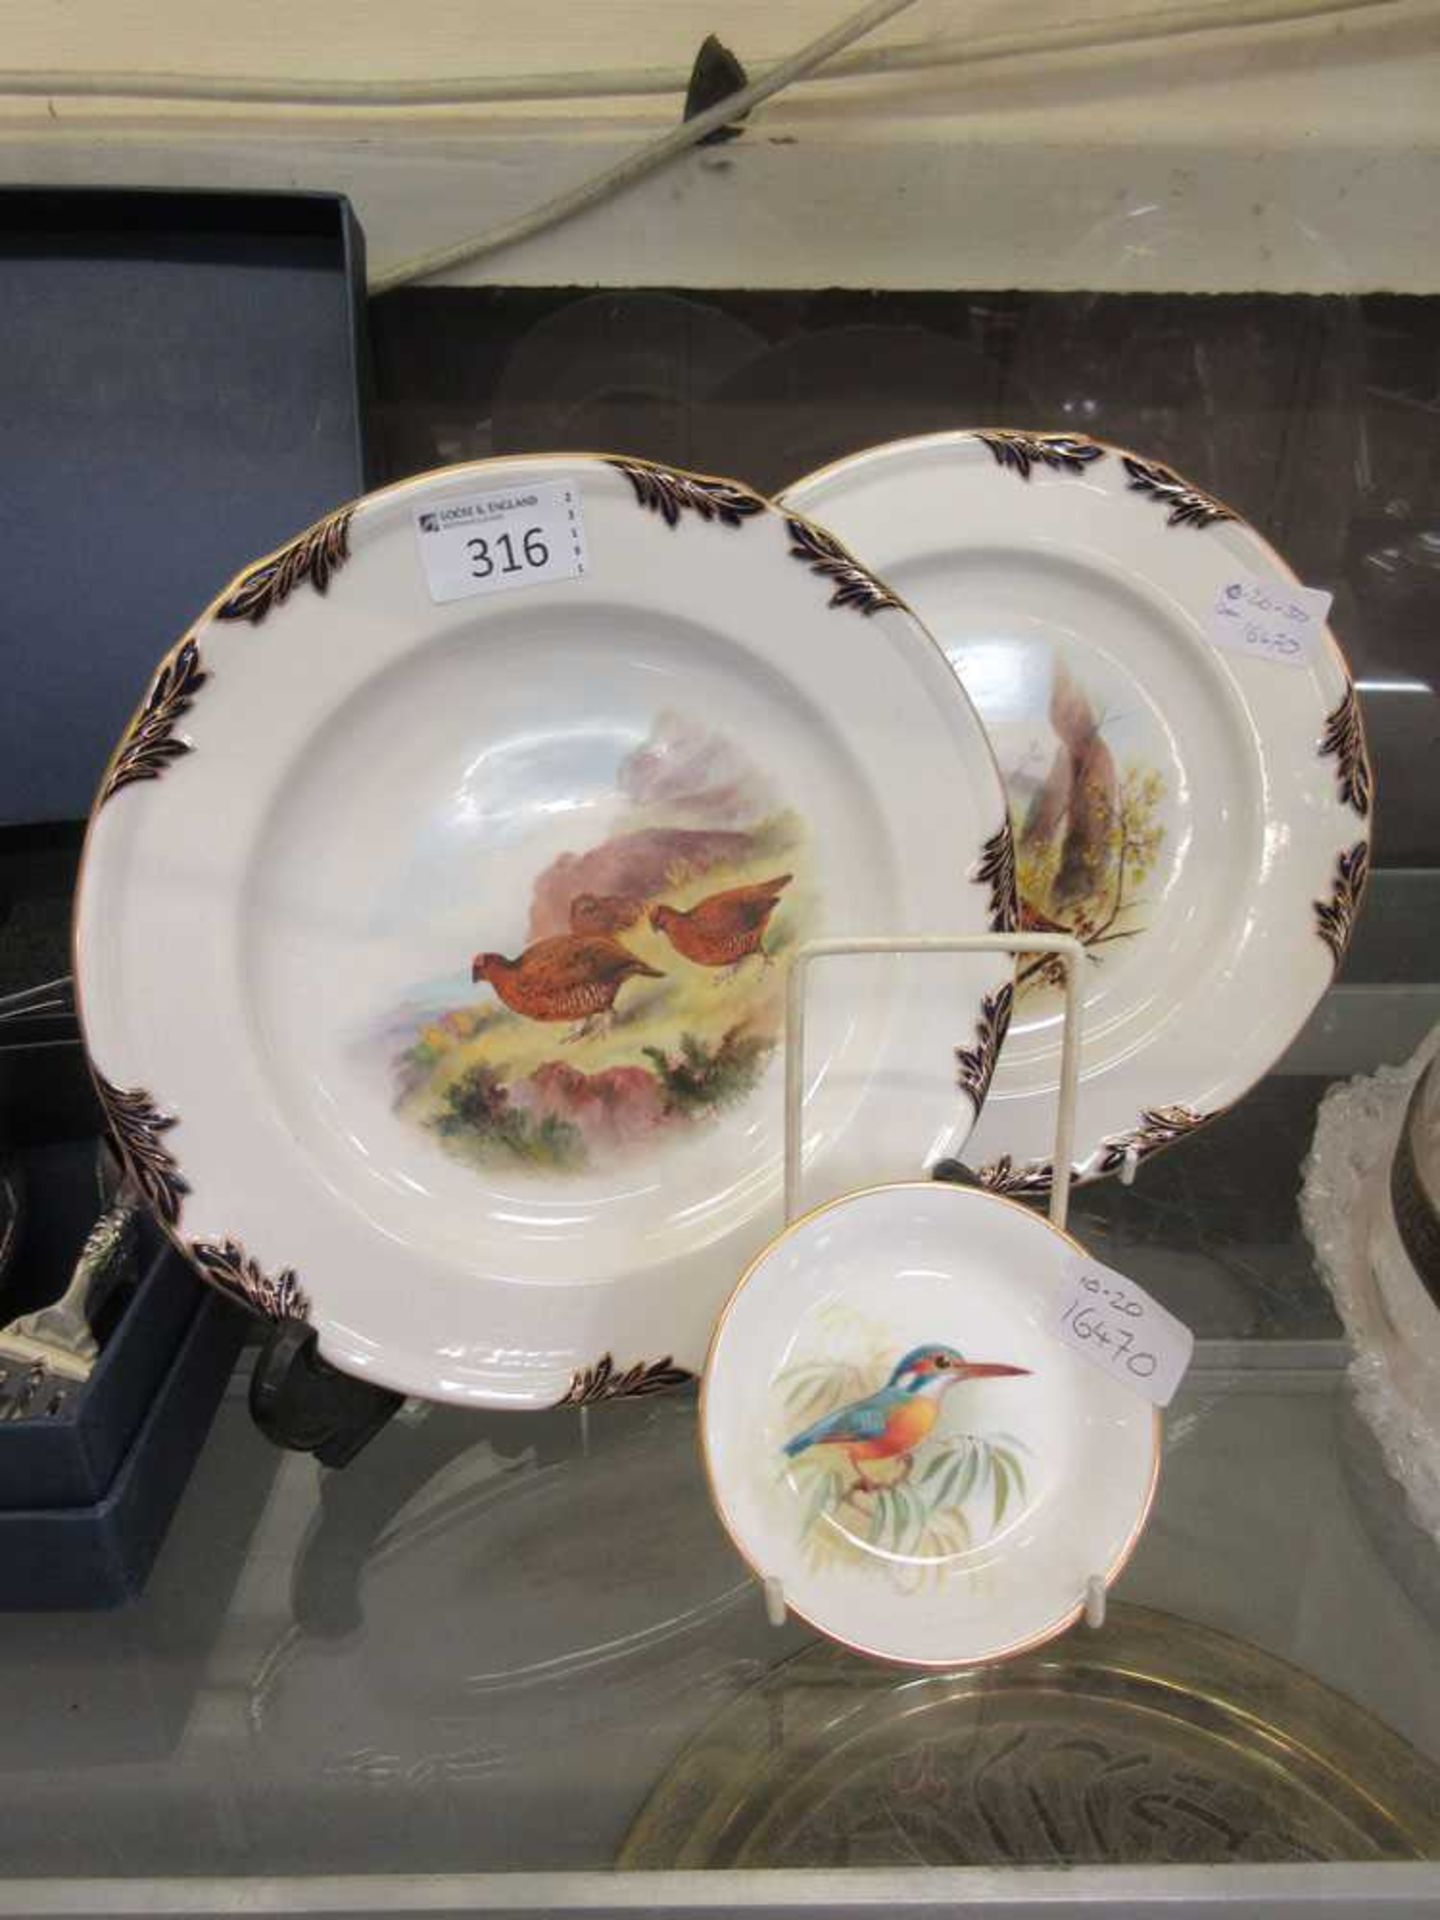 Two Royal Worcester side plates with Woodcock and Grouse designs along with a Royal Worcester pin